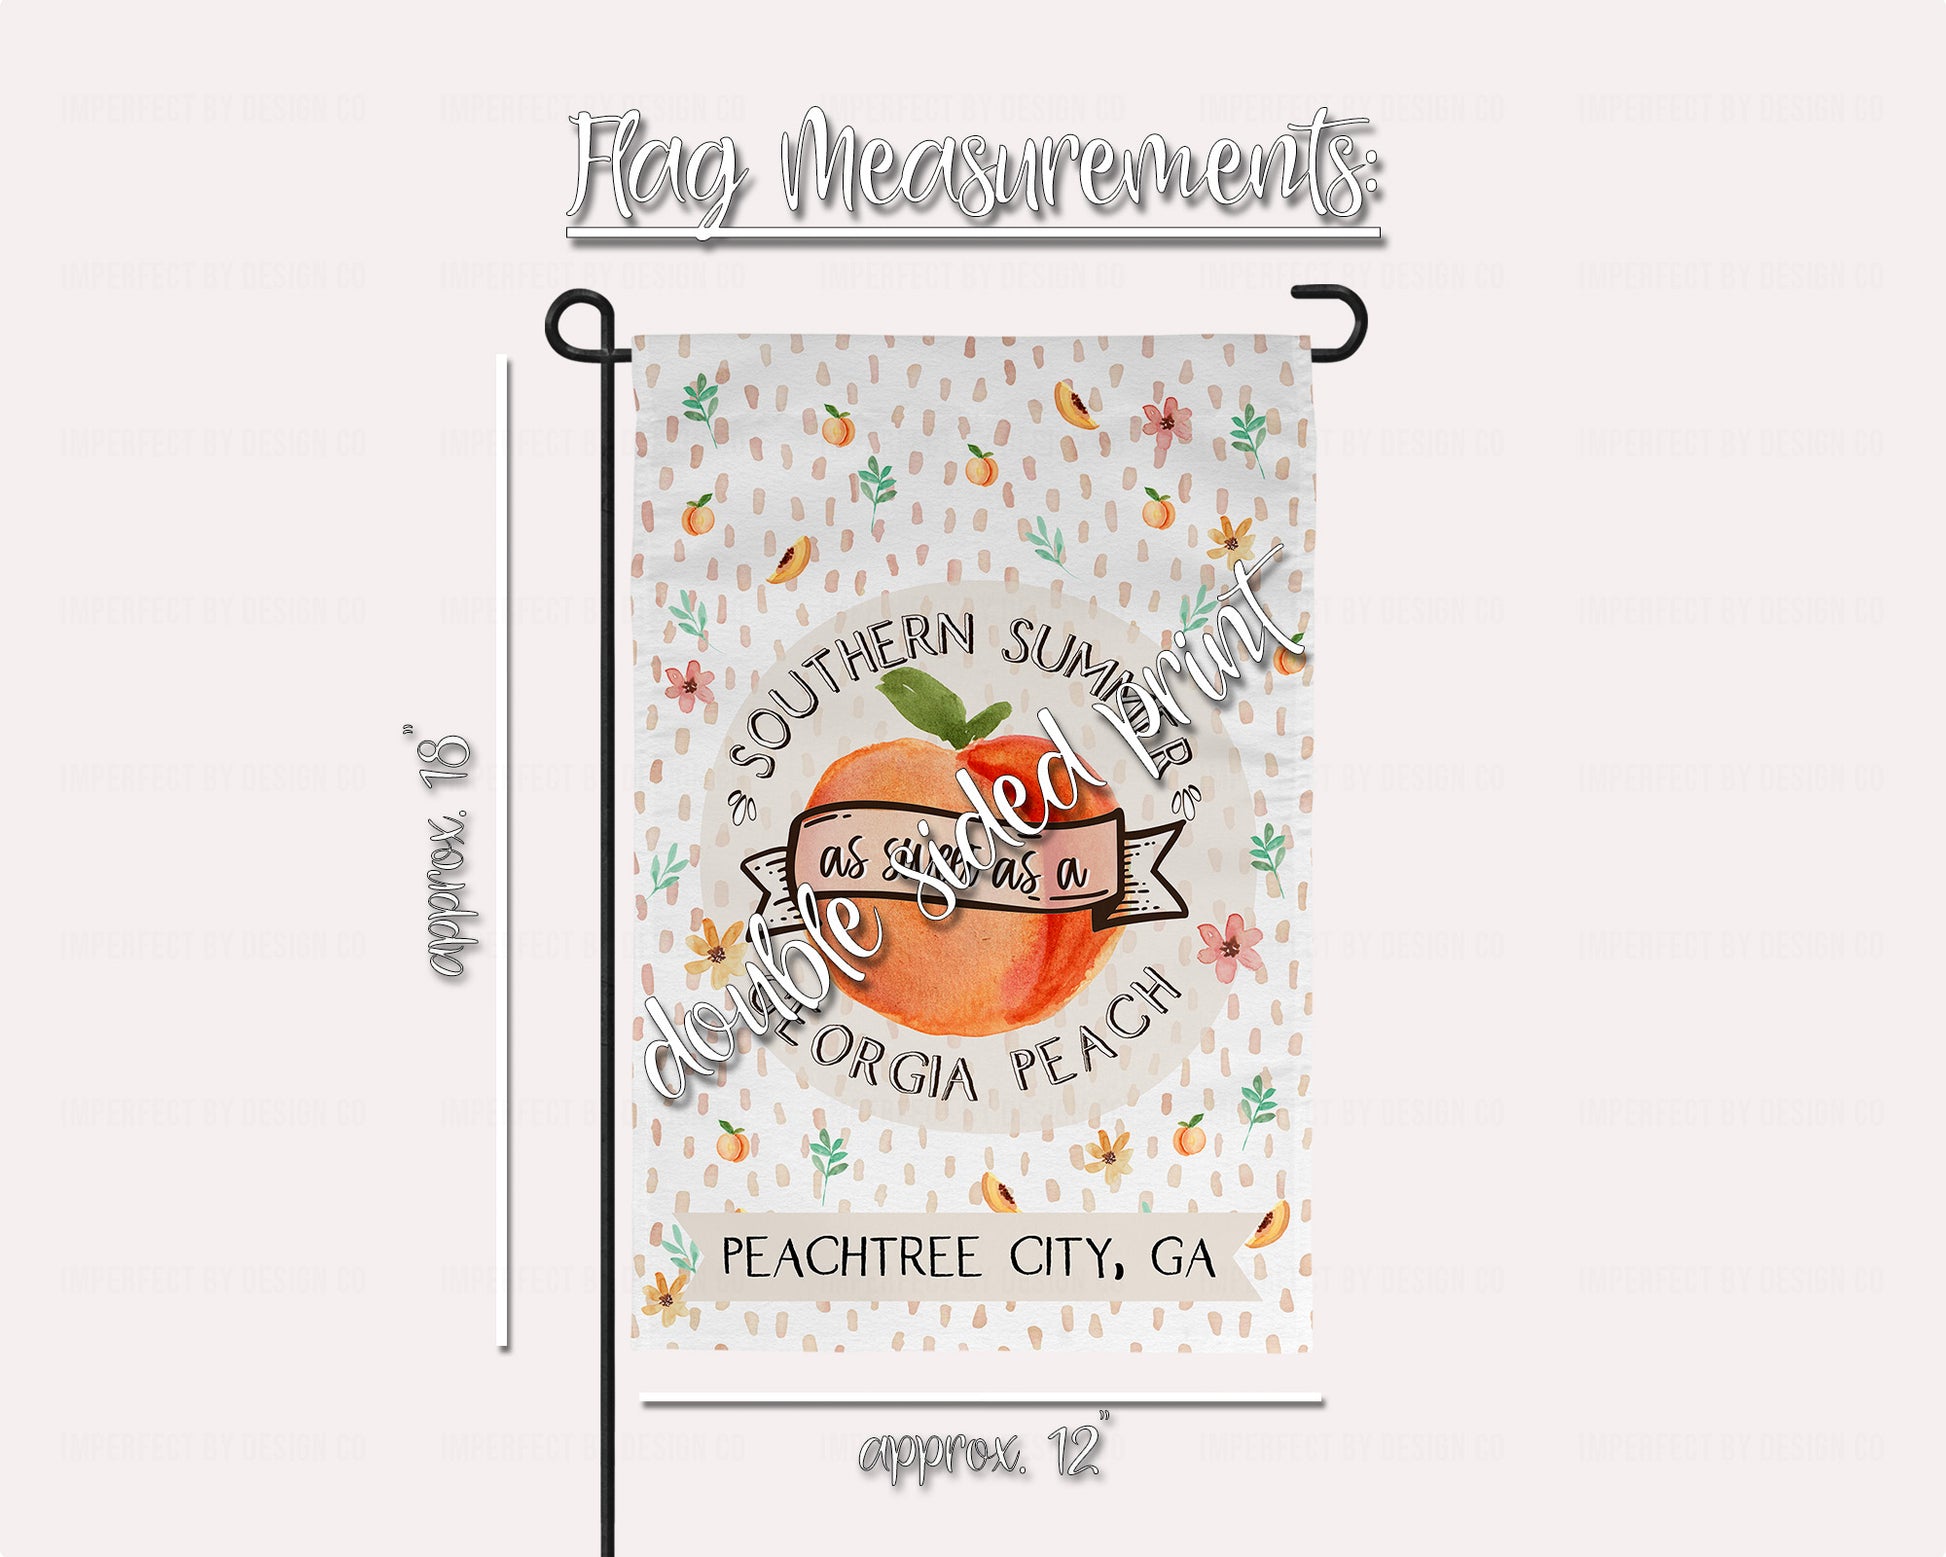 12x18 inches Garden Flag Georgia Peach garden flag capturing the essence of summertime in the South with its vibrant colors and intricate design. Symbolizes the sweet life and all that makes the South a special place. Order now to brighten up your garden with Southern sweetness! Hometown Pride Collection | imperfect by design co